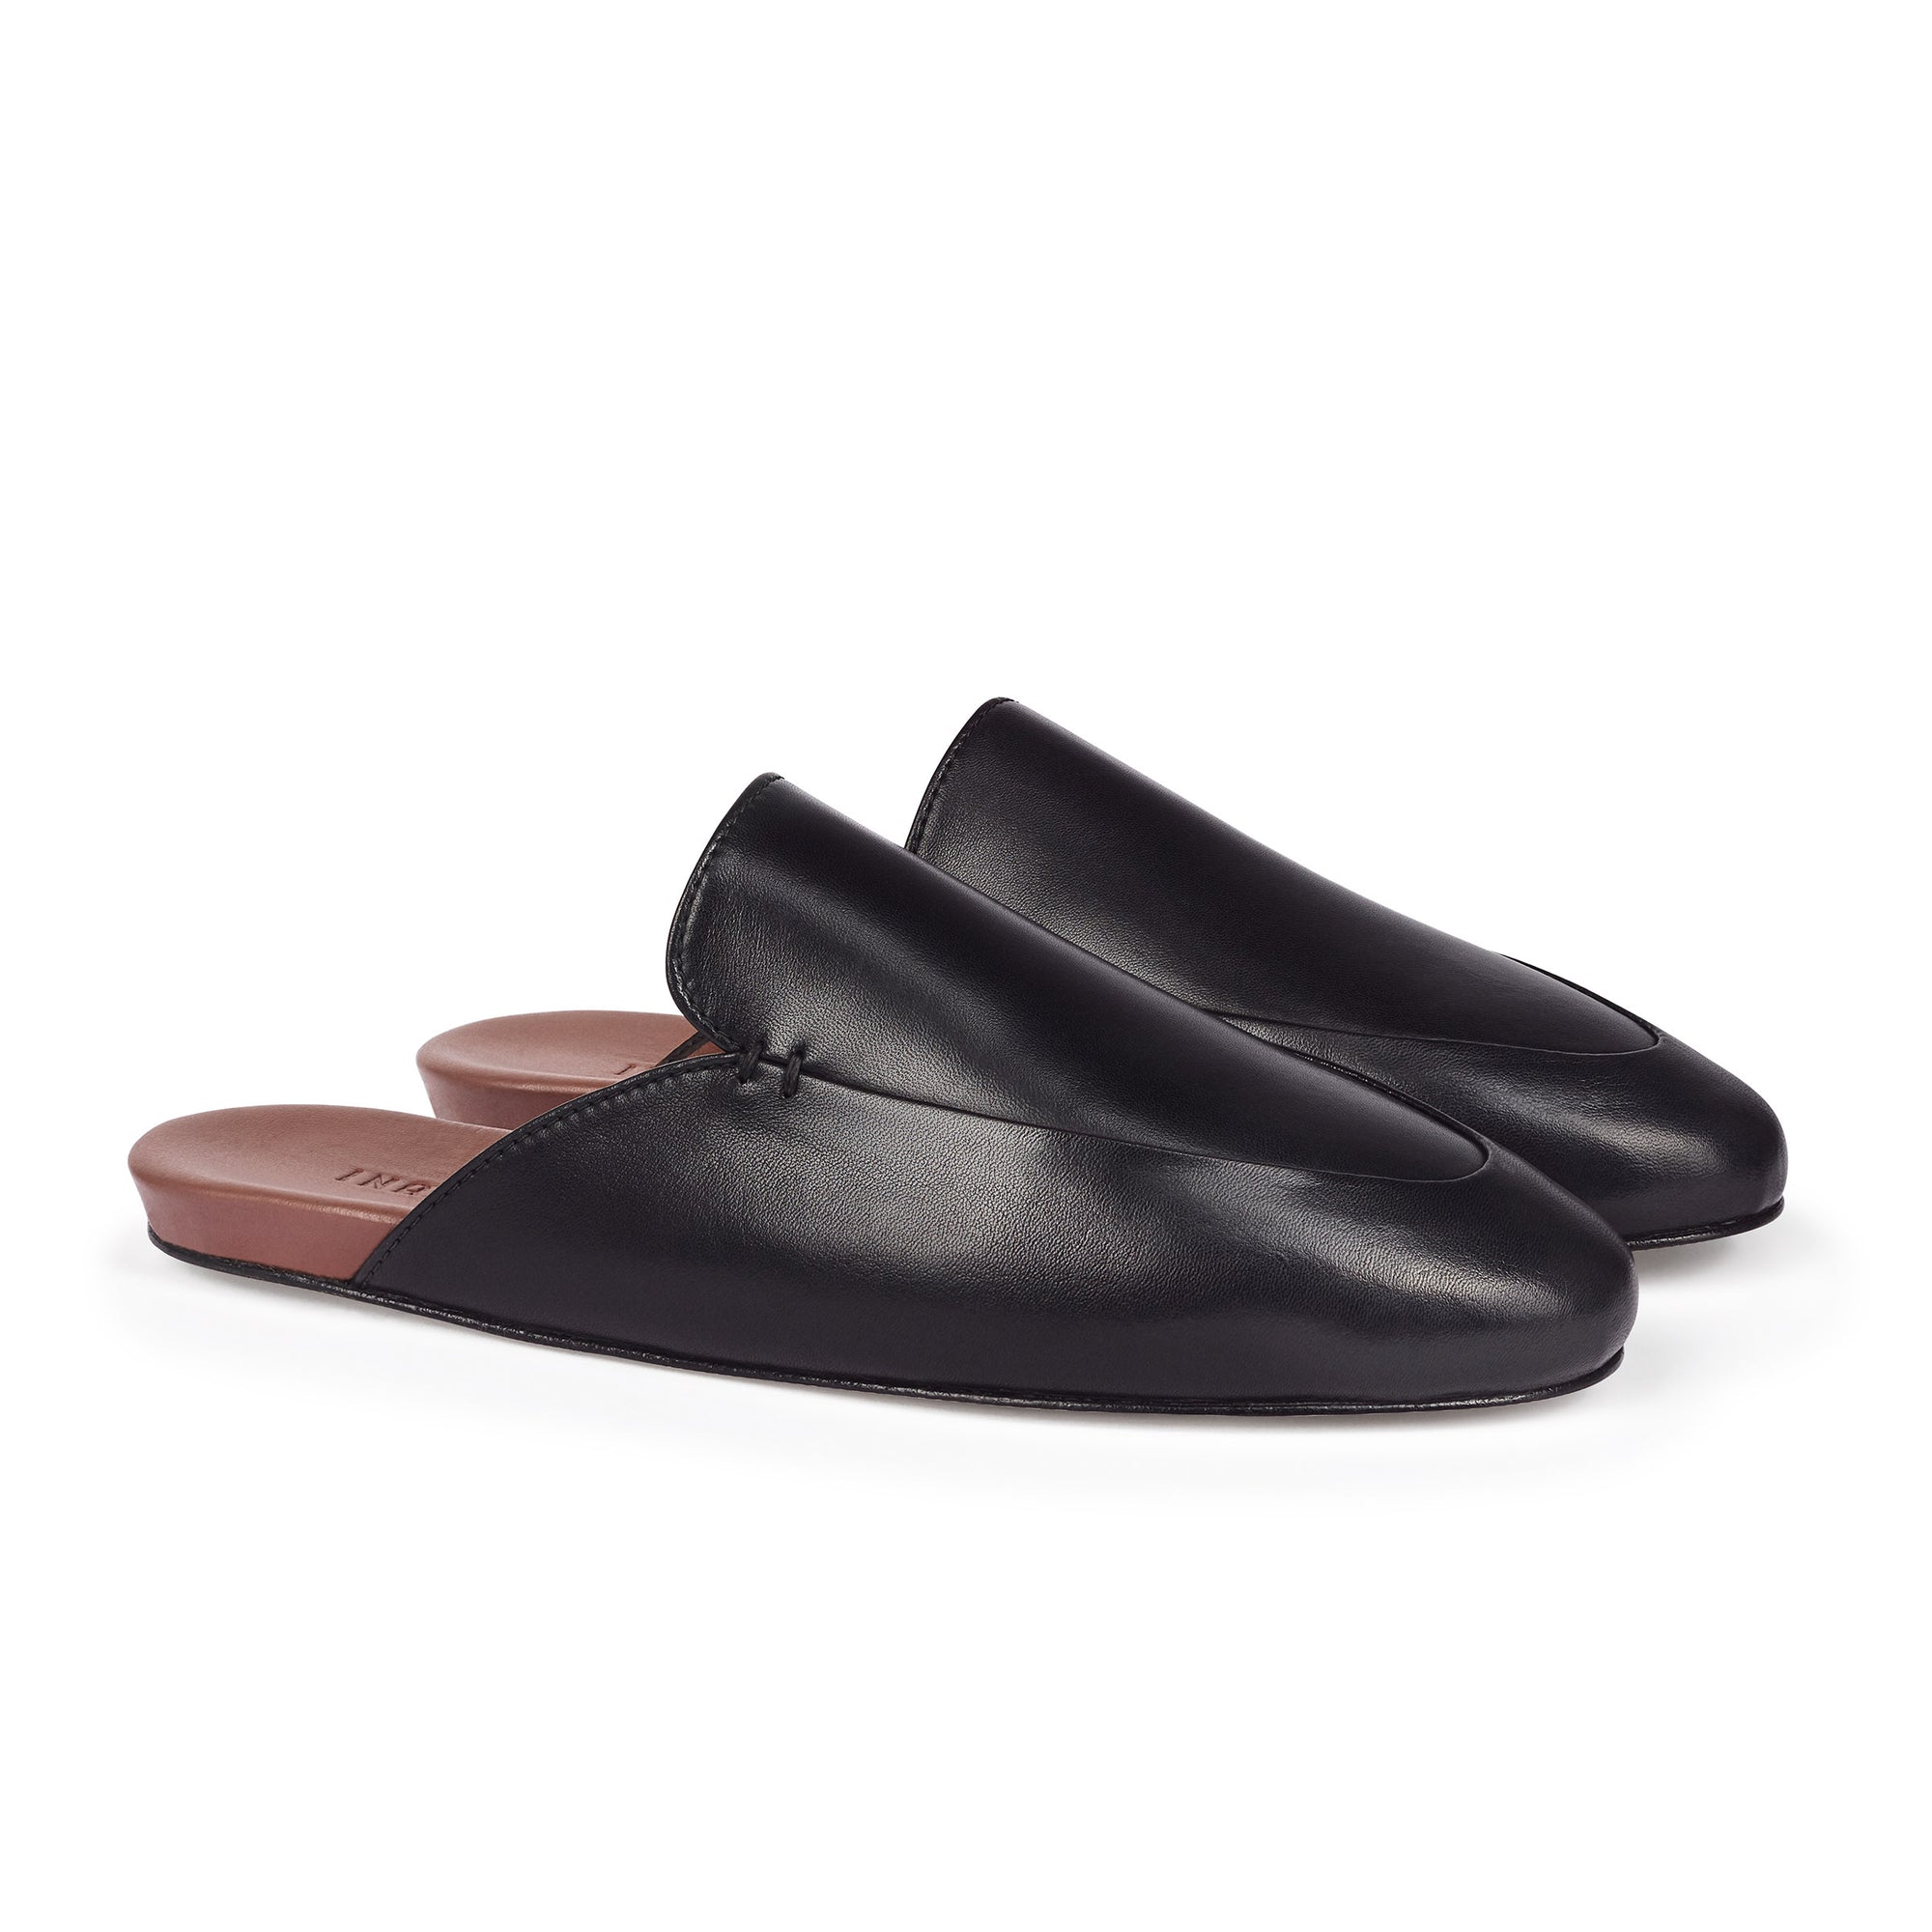 Inabo Women's Slowfer Slipper in black leather and brown leather insole 